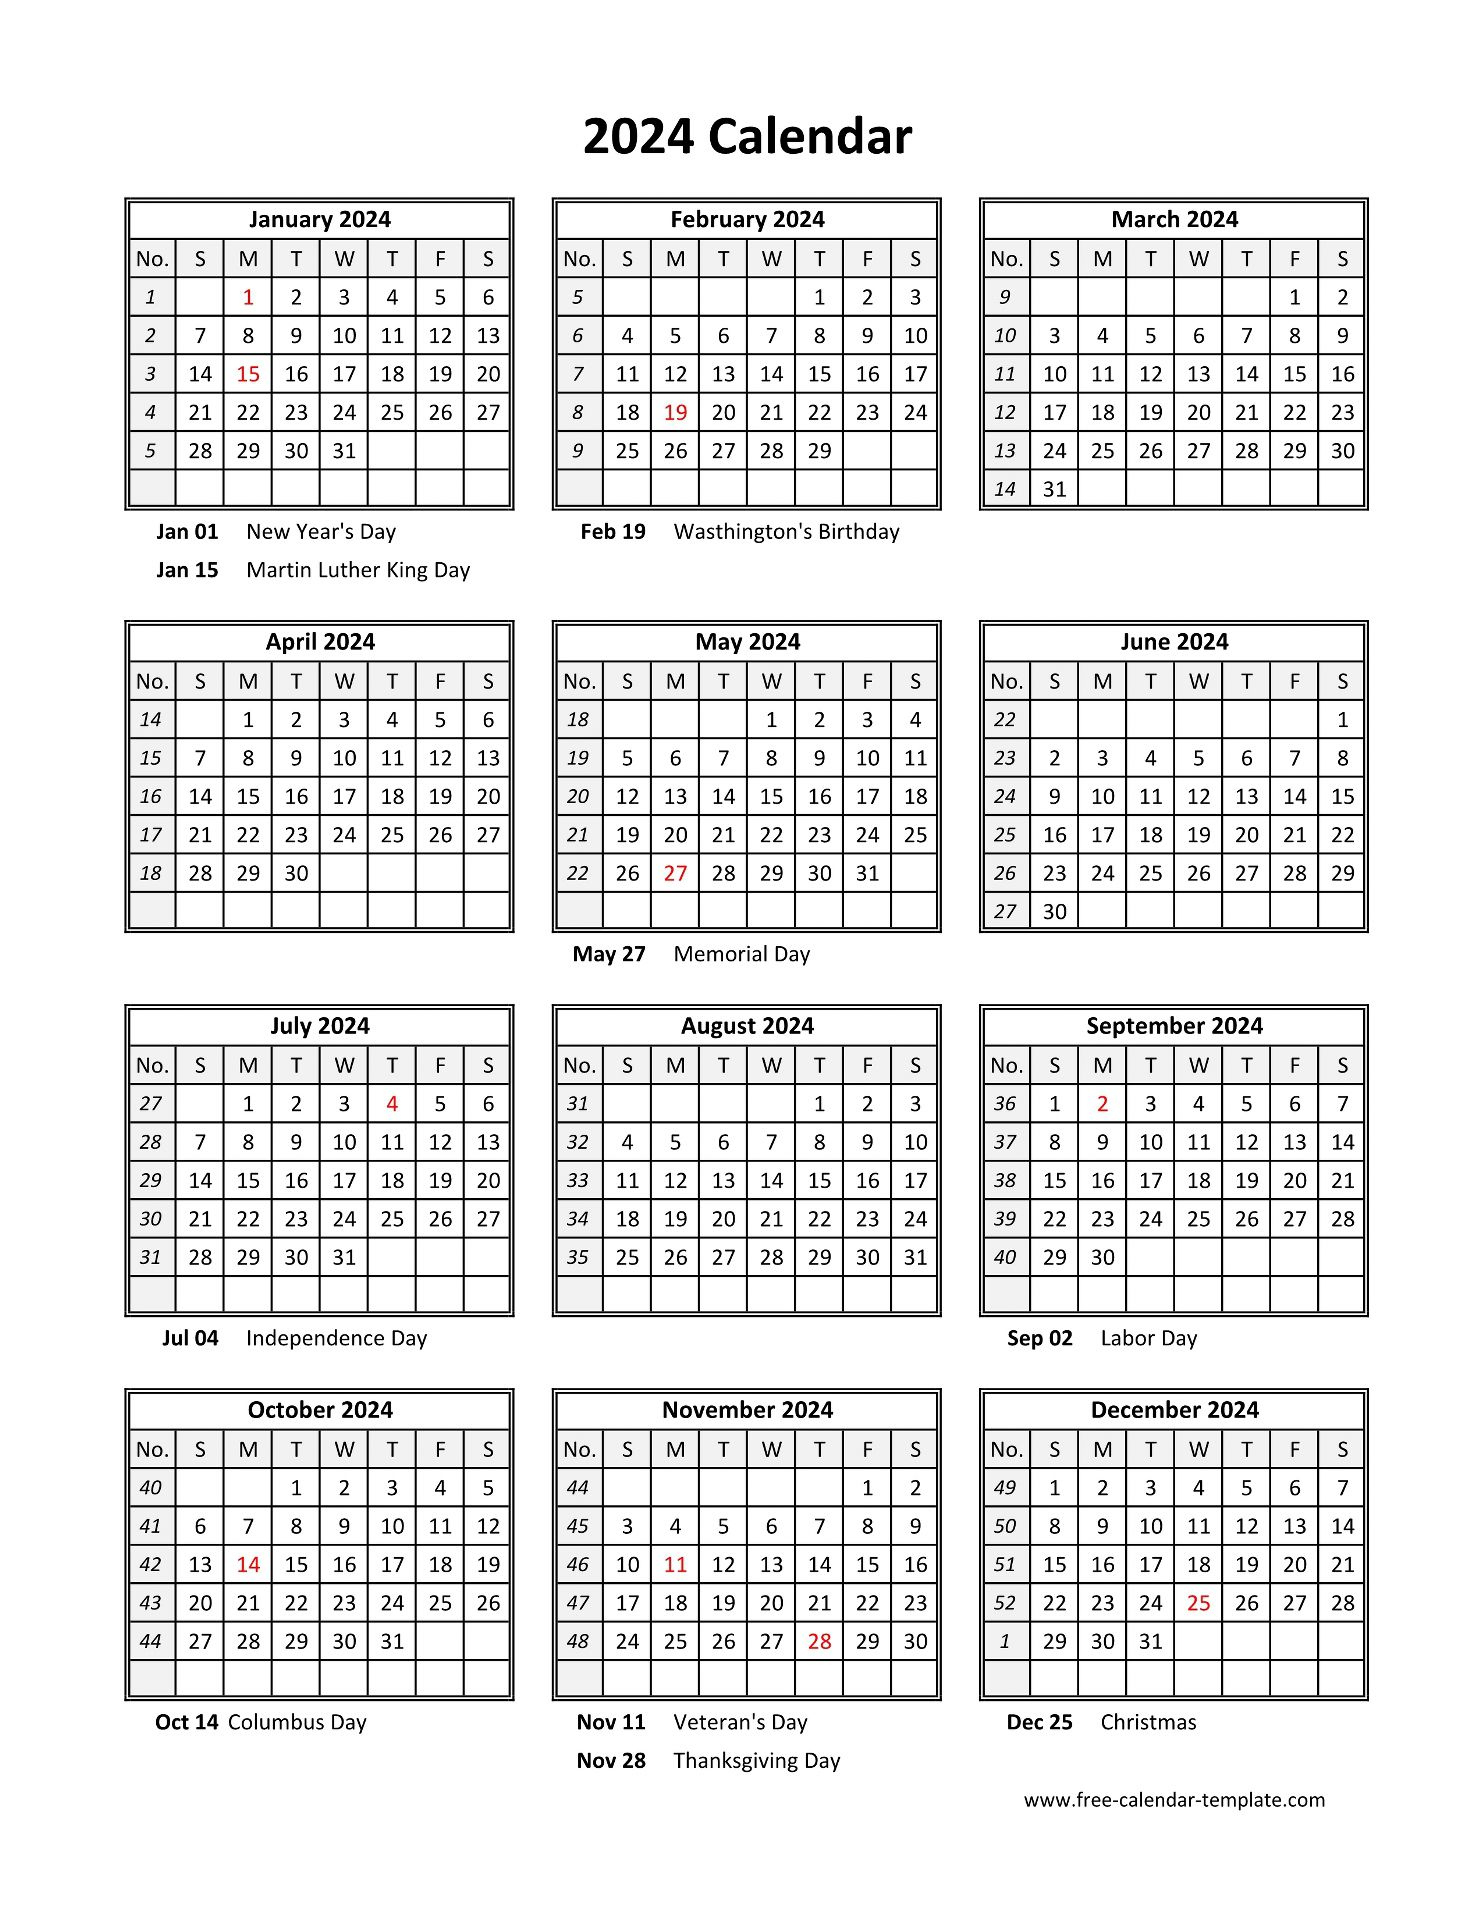 Yearly Printable Calendar 2024 With Holidays | Free-Calendar | 12 Month Free Printable Calendar 2024